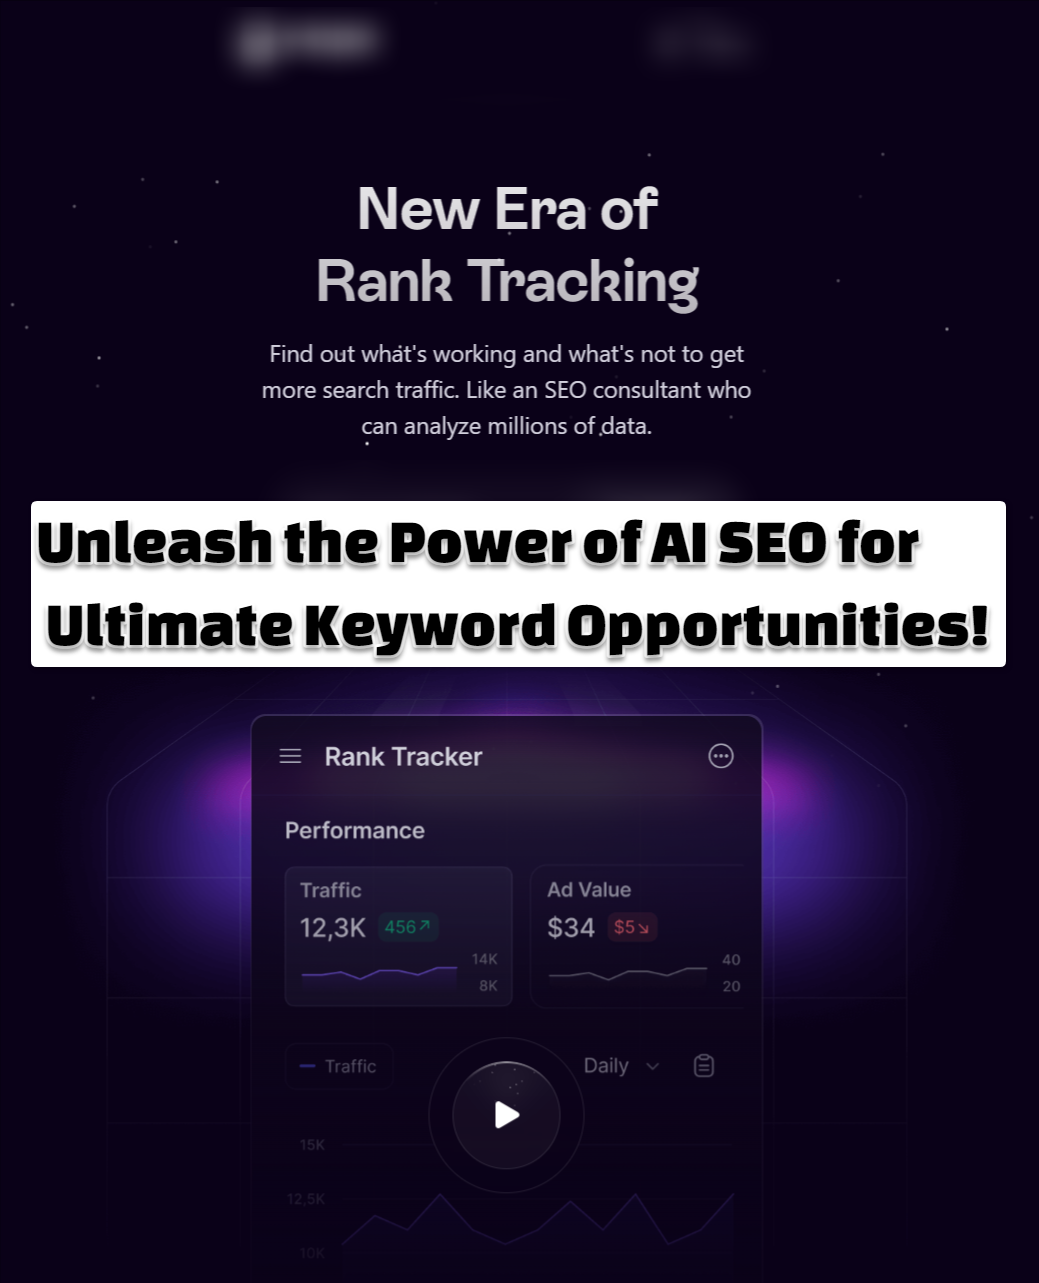 Wope The New Era Of Rank Tracking Wope Lifetime Deal: Unleash the Power of AI SEO for Ultimate Keyword Opportunities!